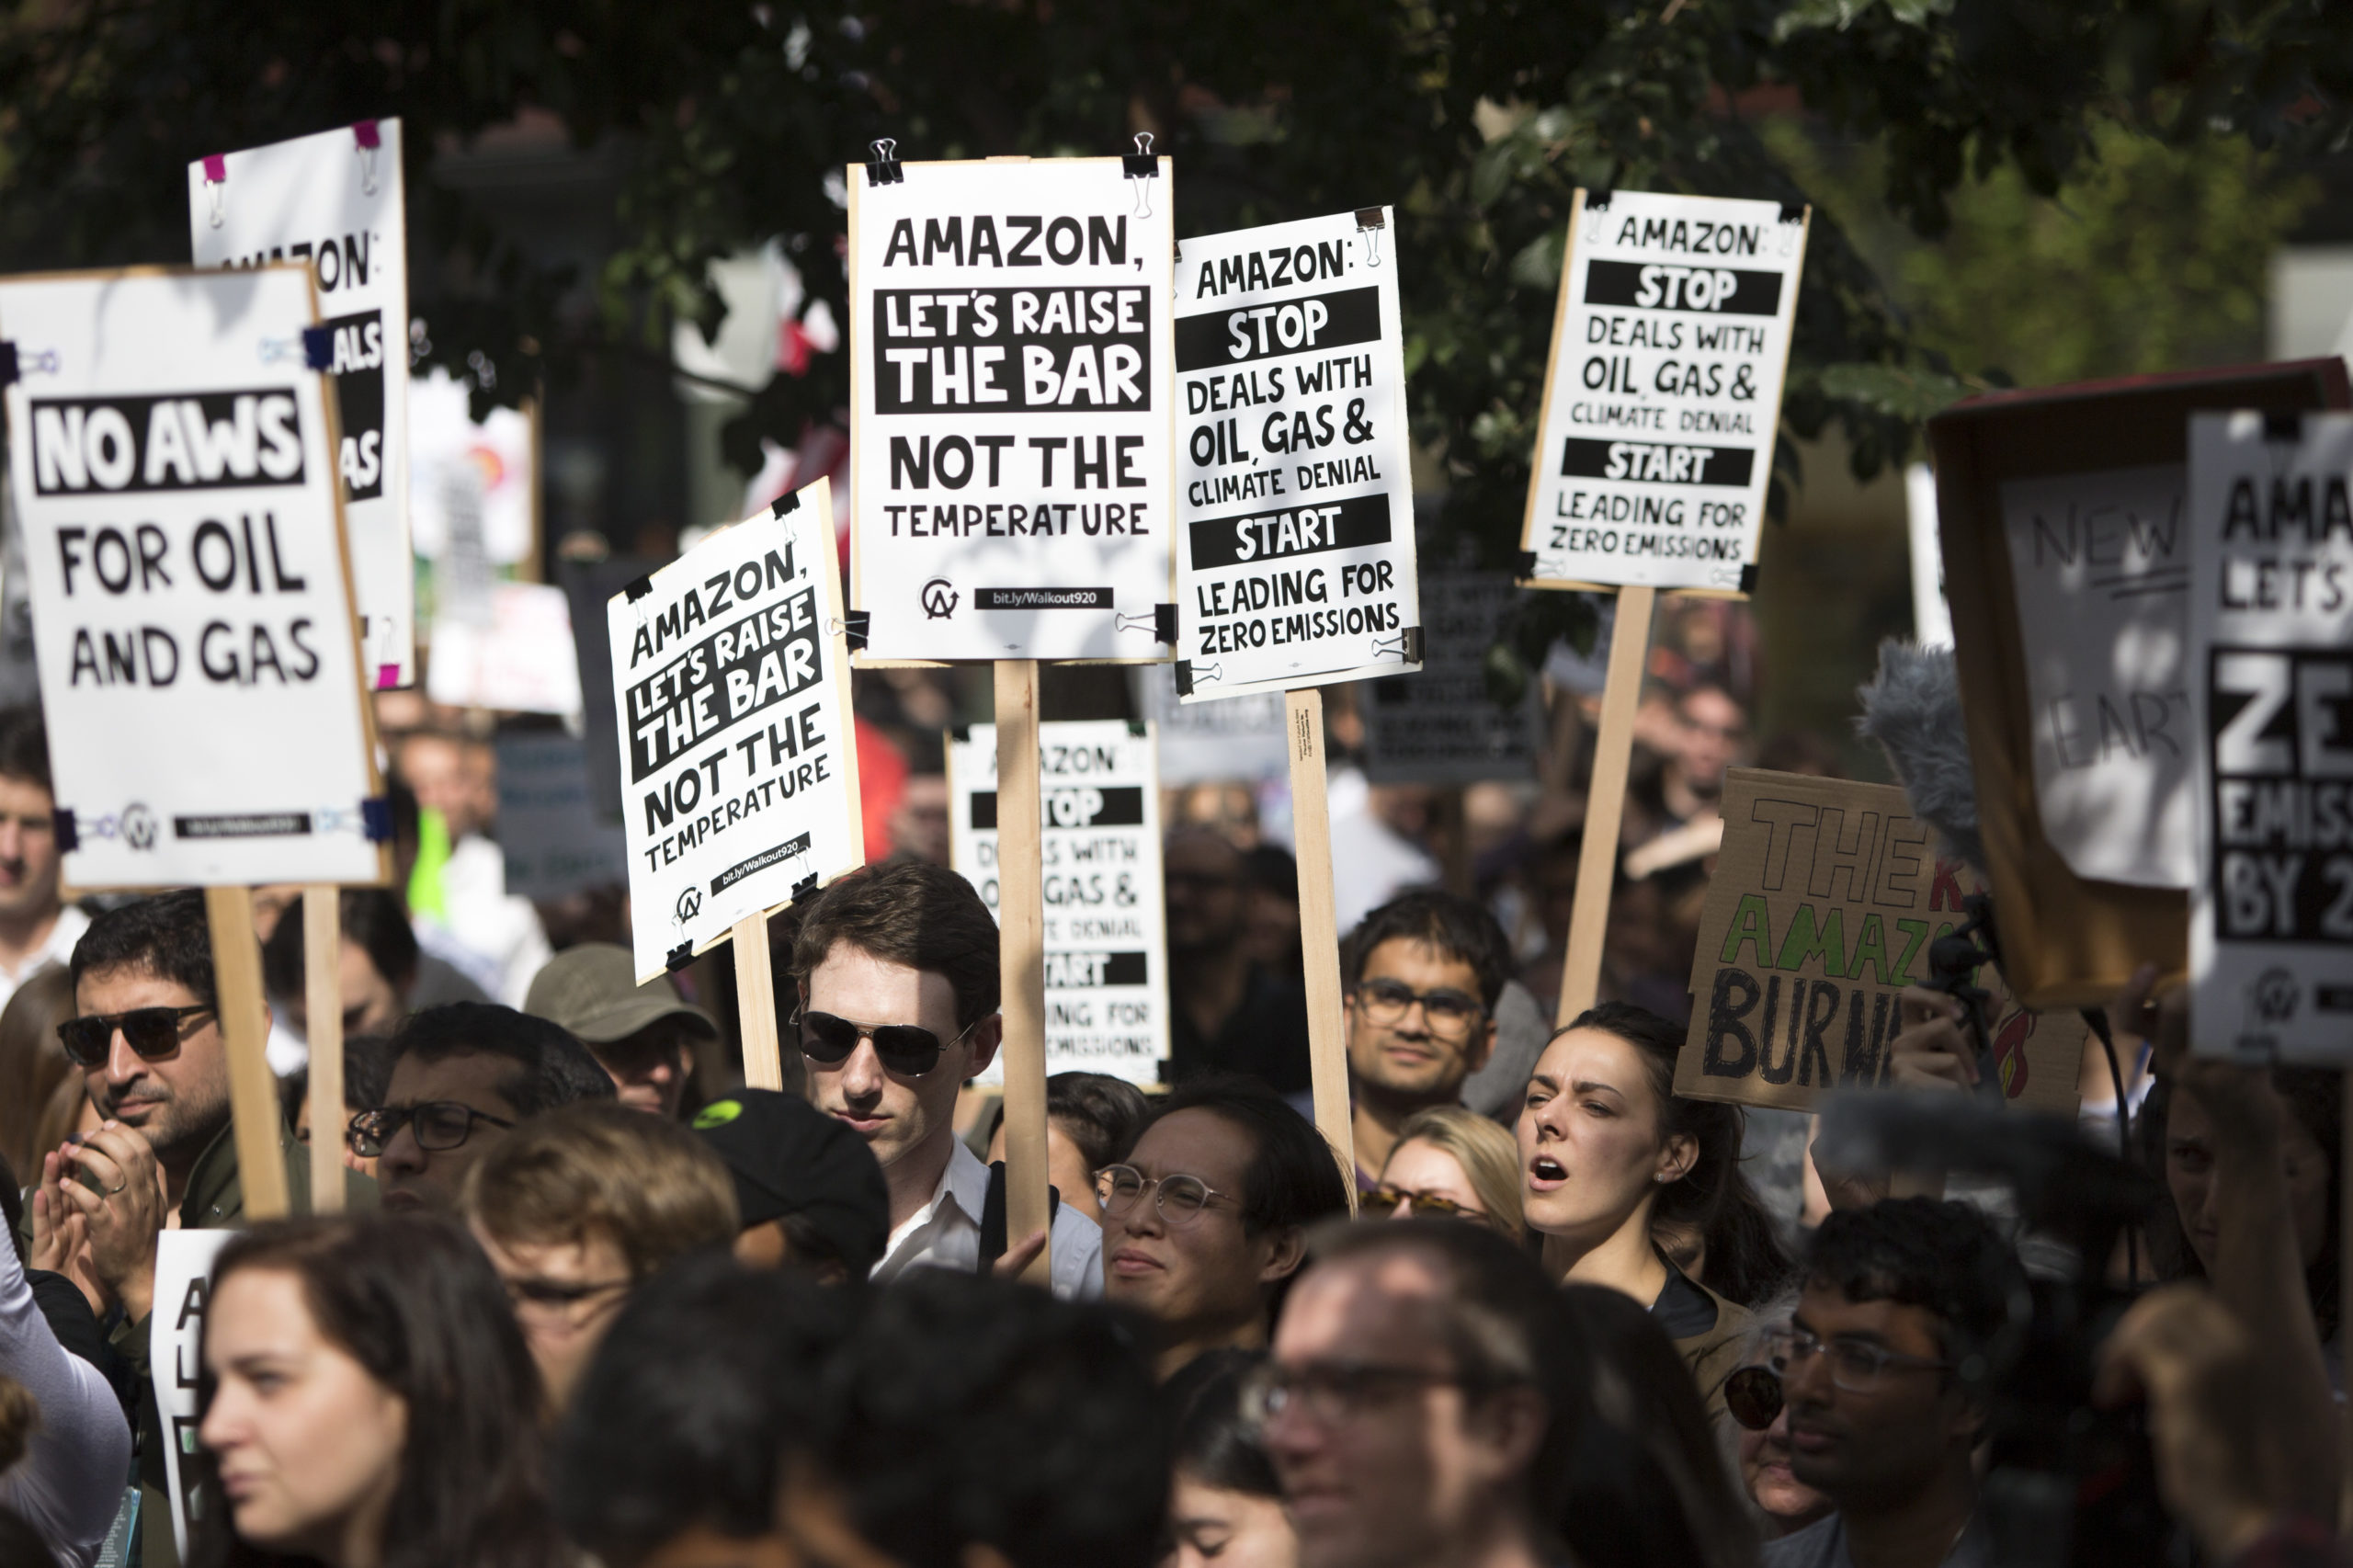 Amazon Employees for Climate Justice lead a walk out and rally at the company's headquarters in Seattle, Washington on Sept. 20, 2019. (Jason Redmond/AFP via Getty Images)